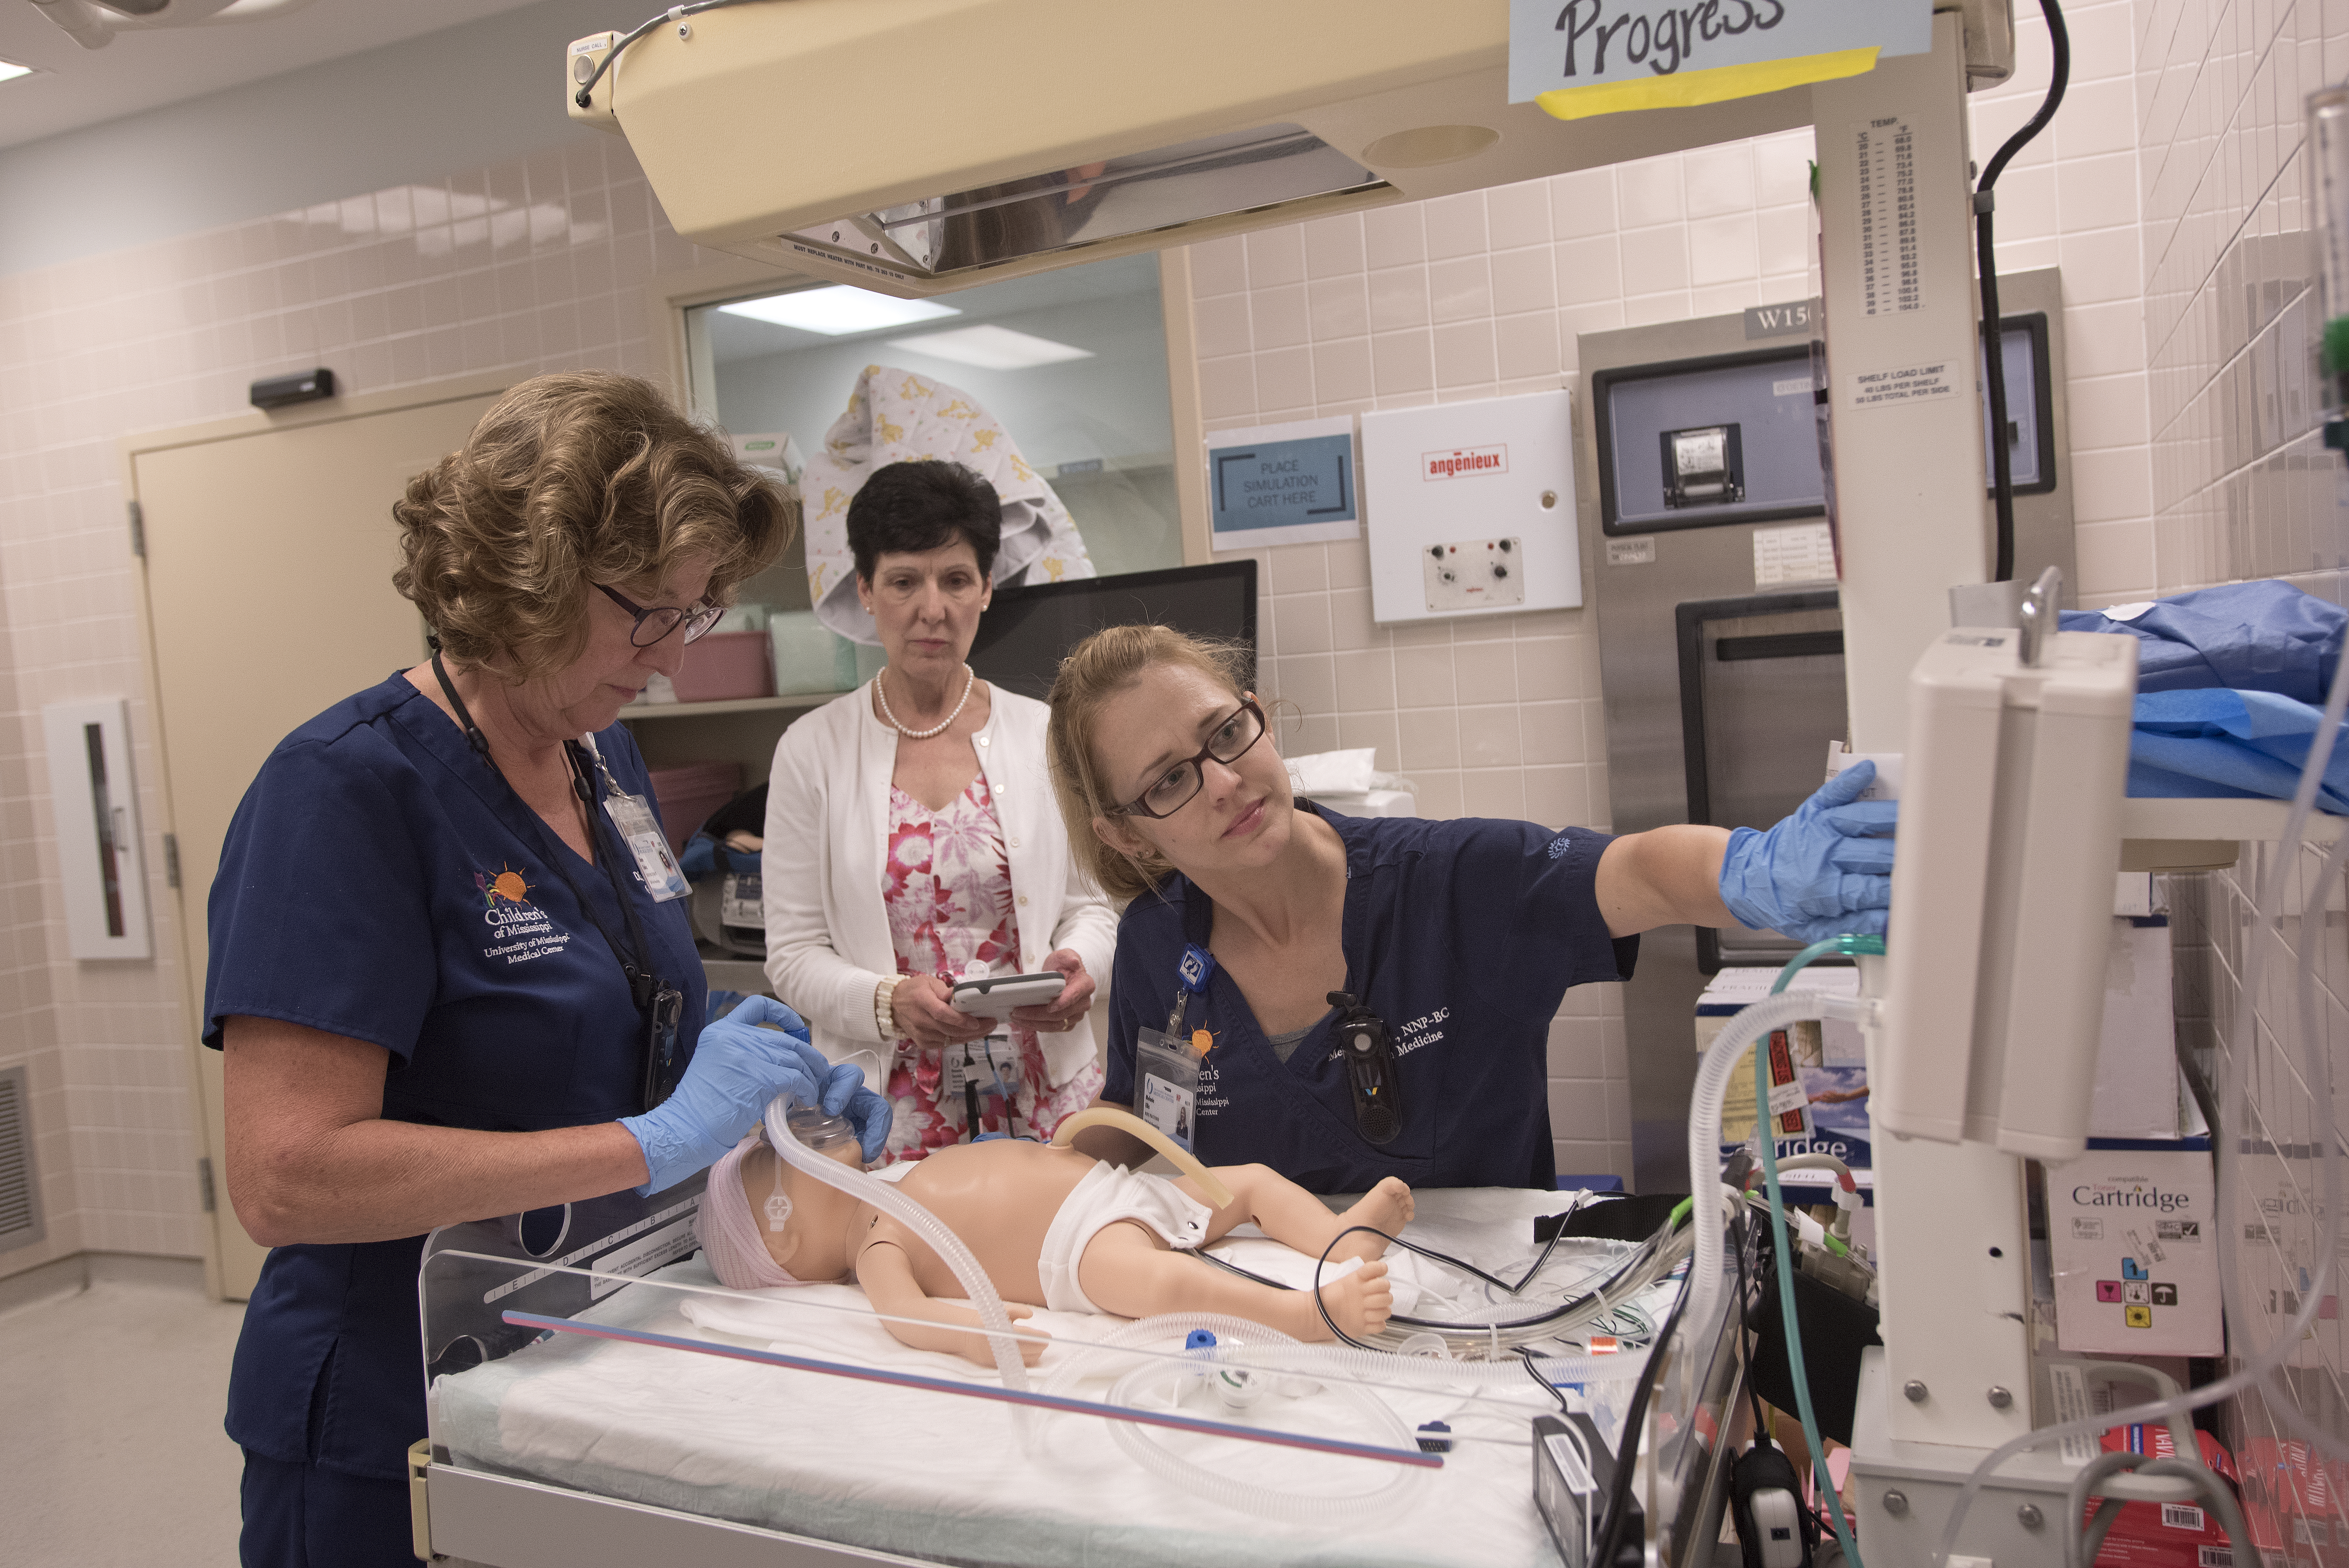 New neonatal suite, simulation area give babies best possible start